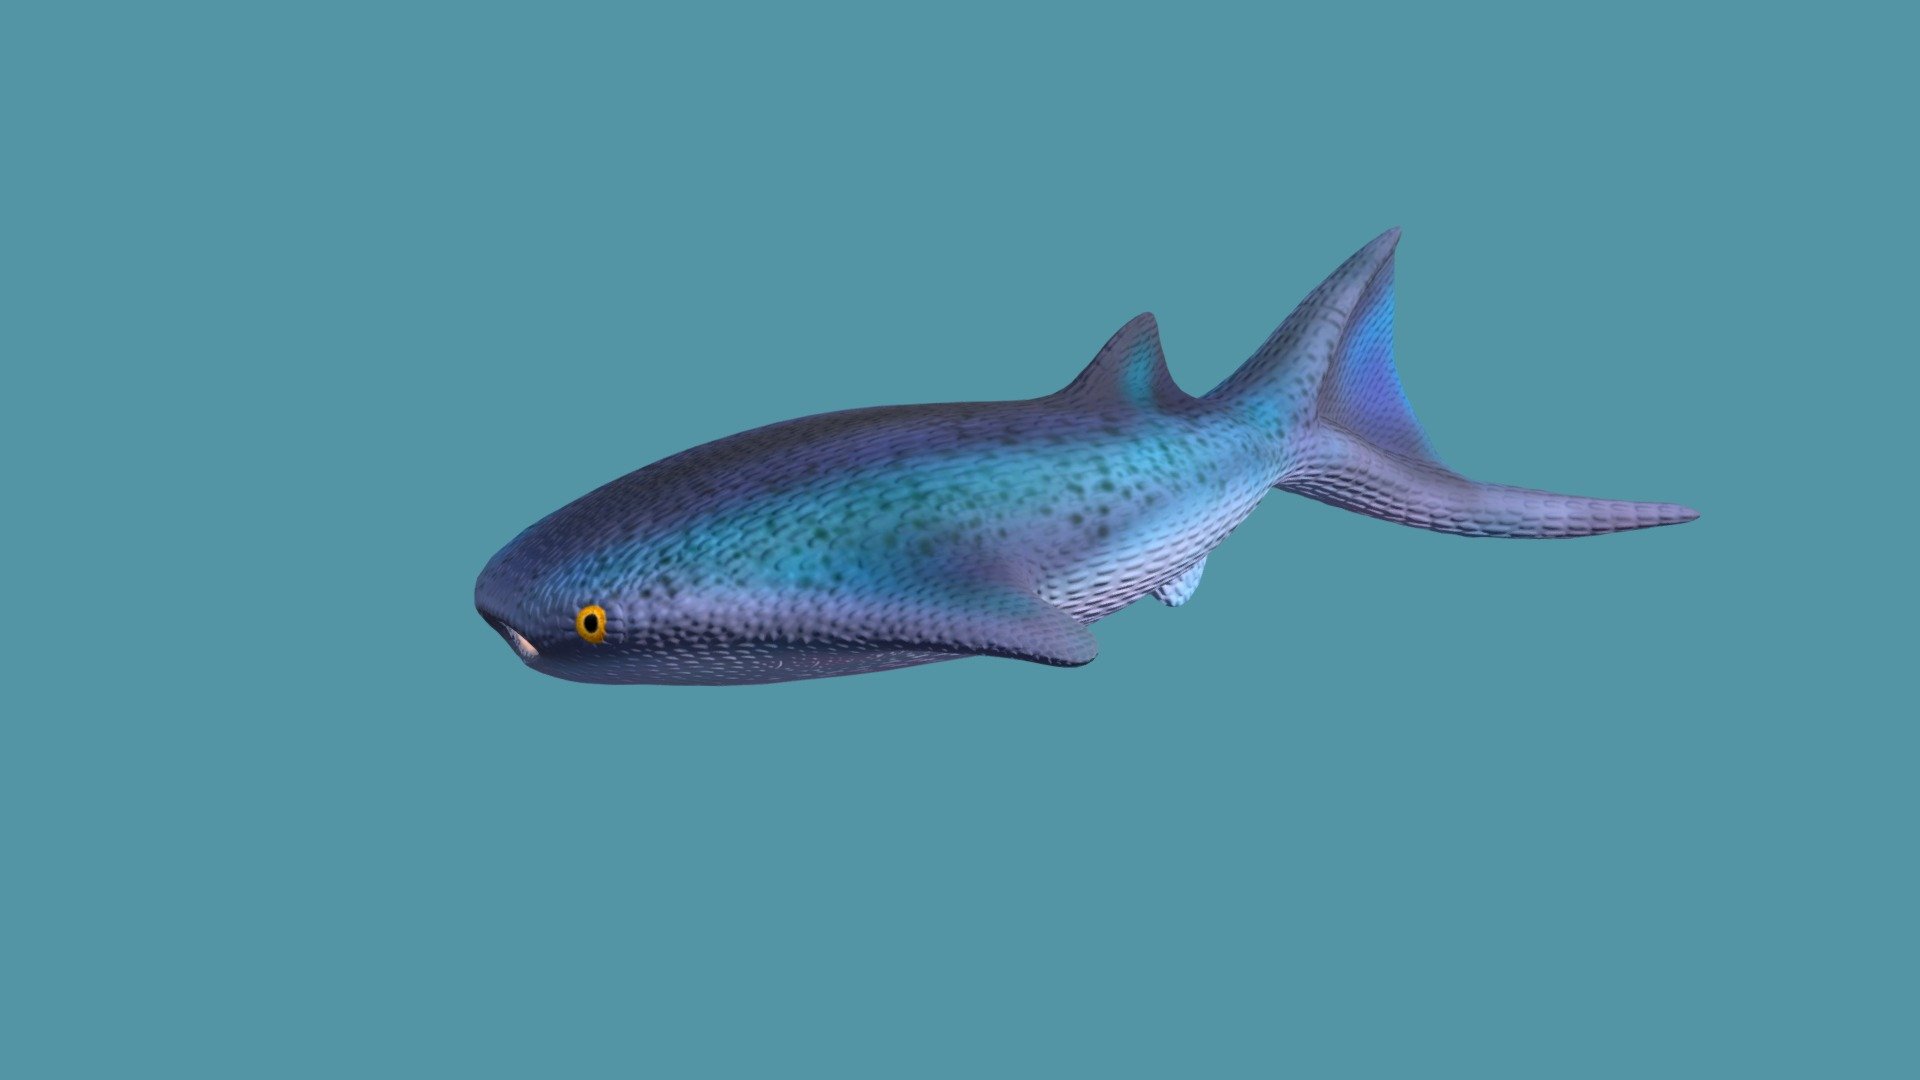 The Thelodus is an extinct genus from the Silurian period. They were part of the jawless fish and their bony scales are often used as guide fossils 3d model